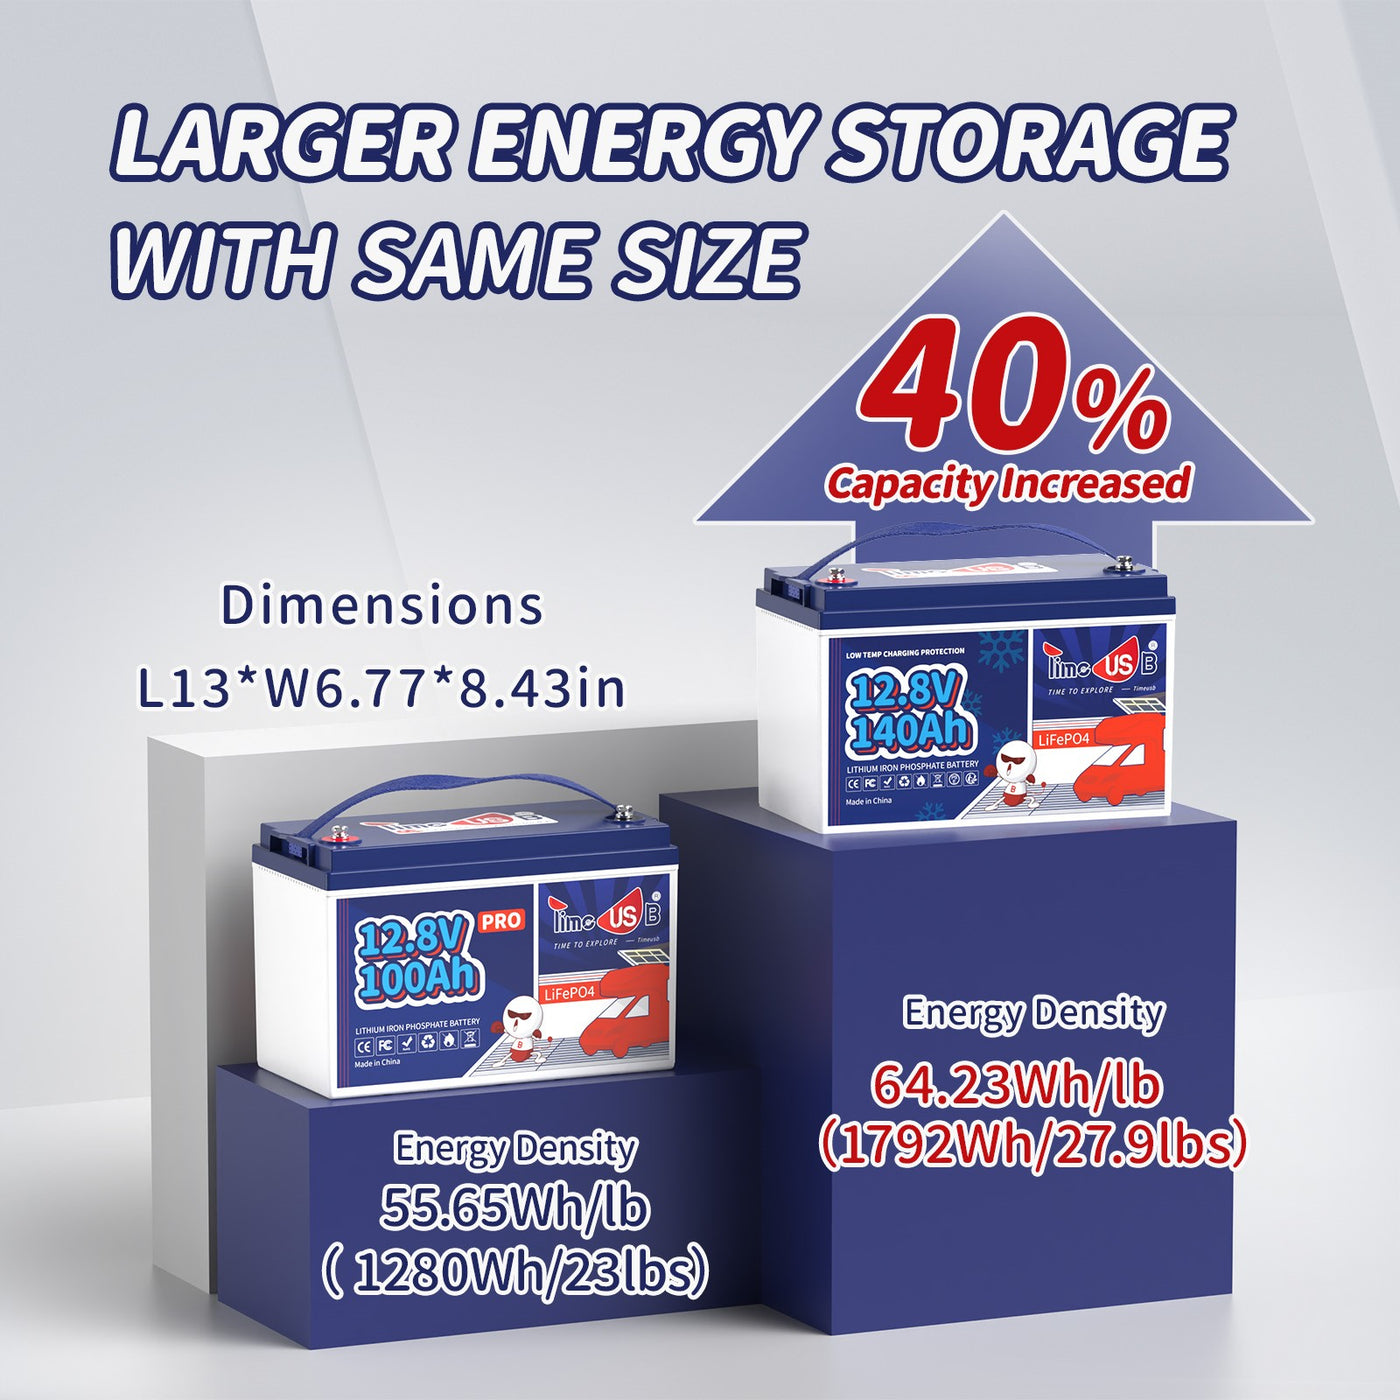 Timeusb 12V 140Ah LiFePO4 Battery | 1792Wh & 1280W | 100A BMS